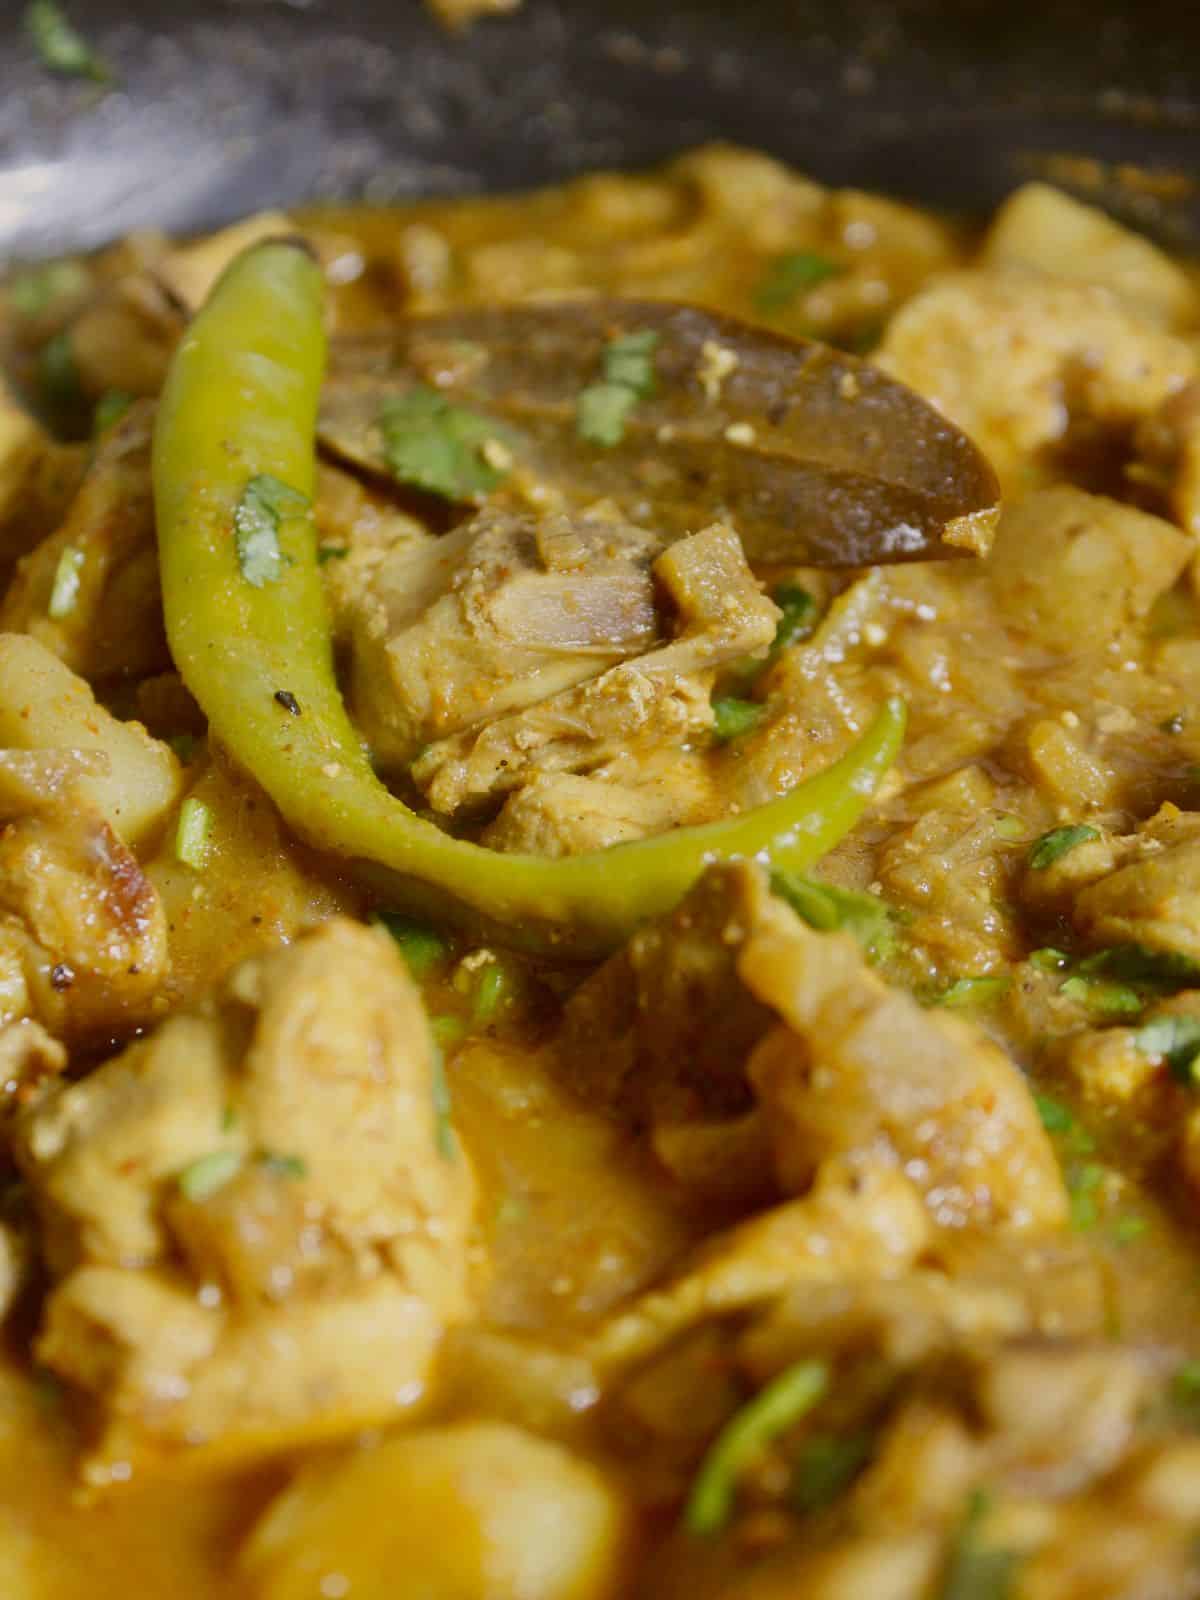 zoom in image of banana stem chicken curry